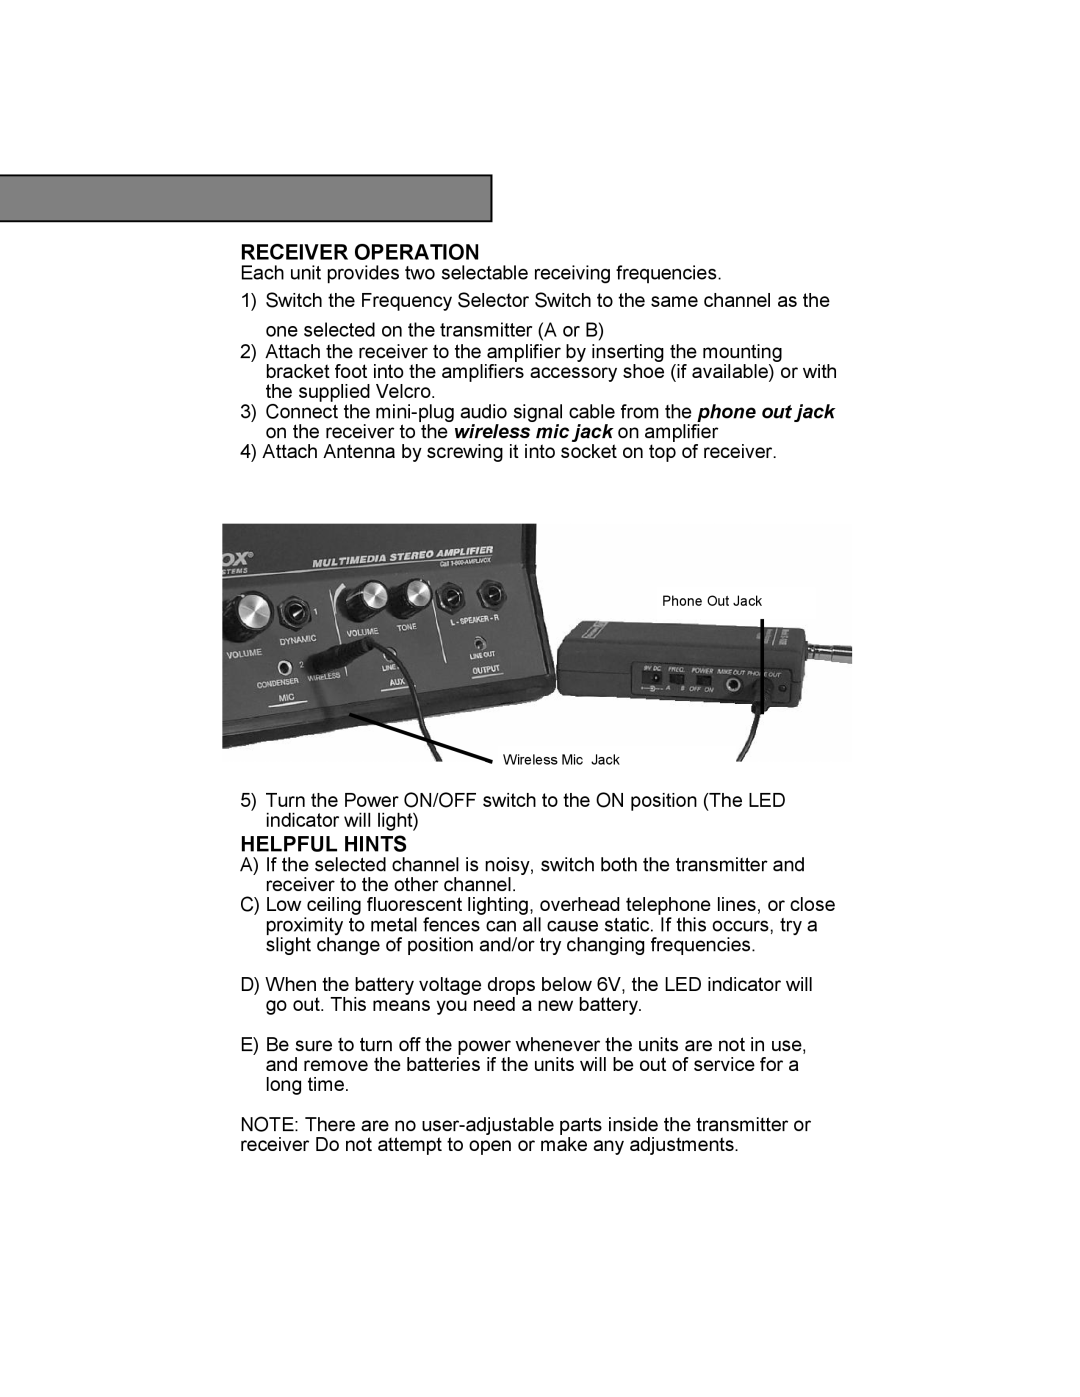 AmpliVox S1600, S1610 owner manual Receiver Operation, Helpful Hints 